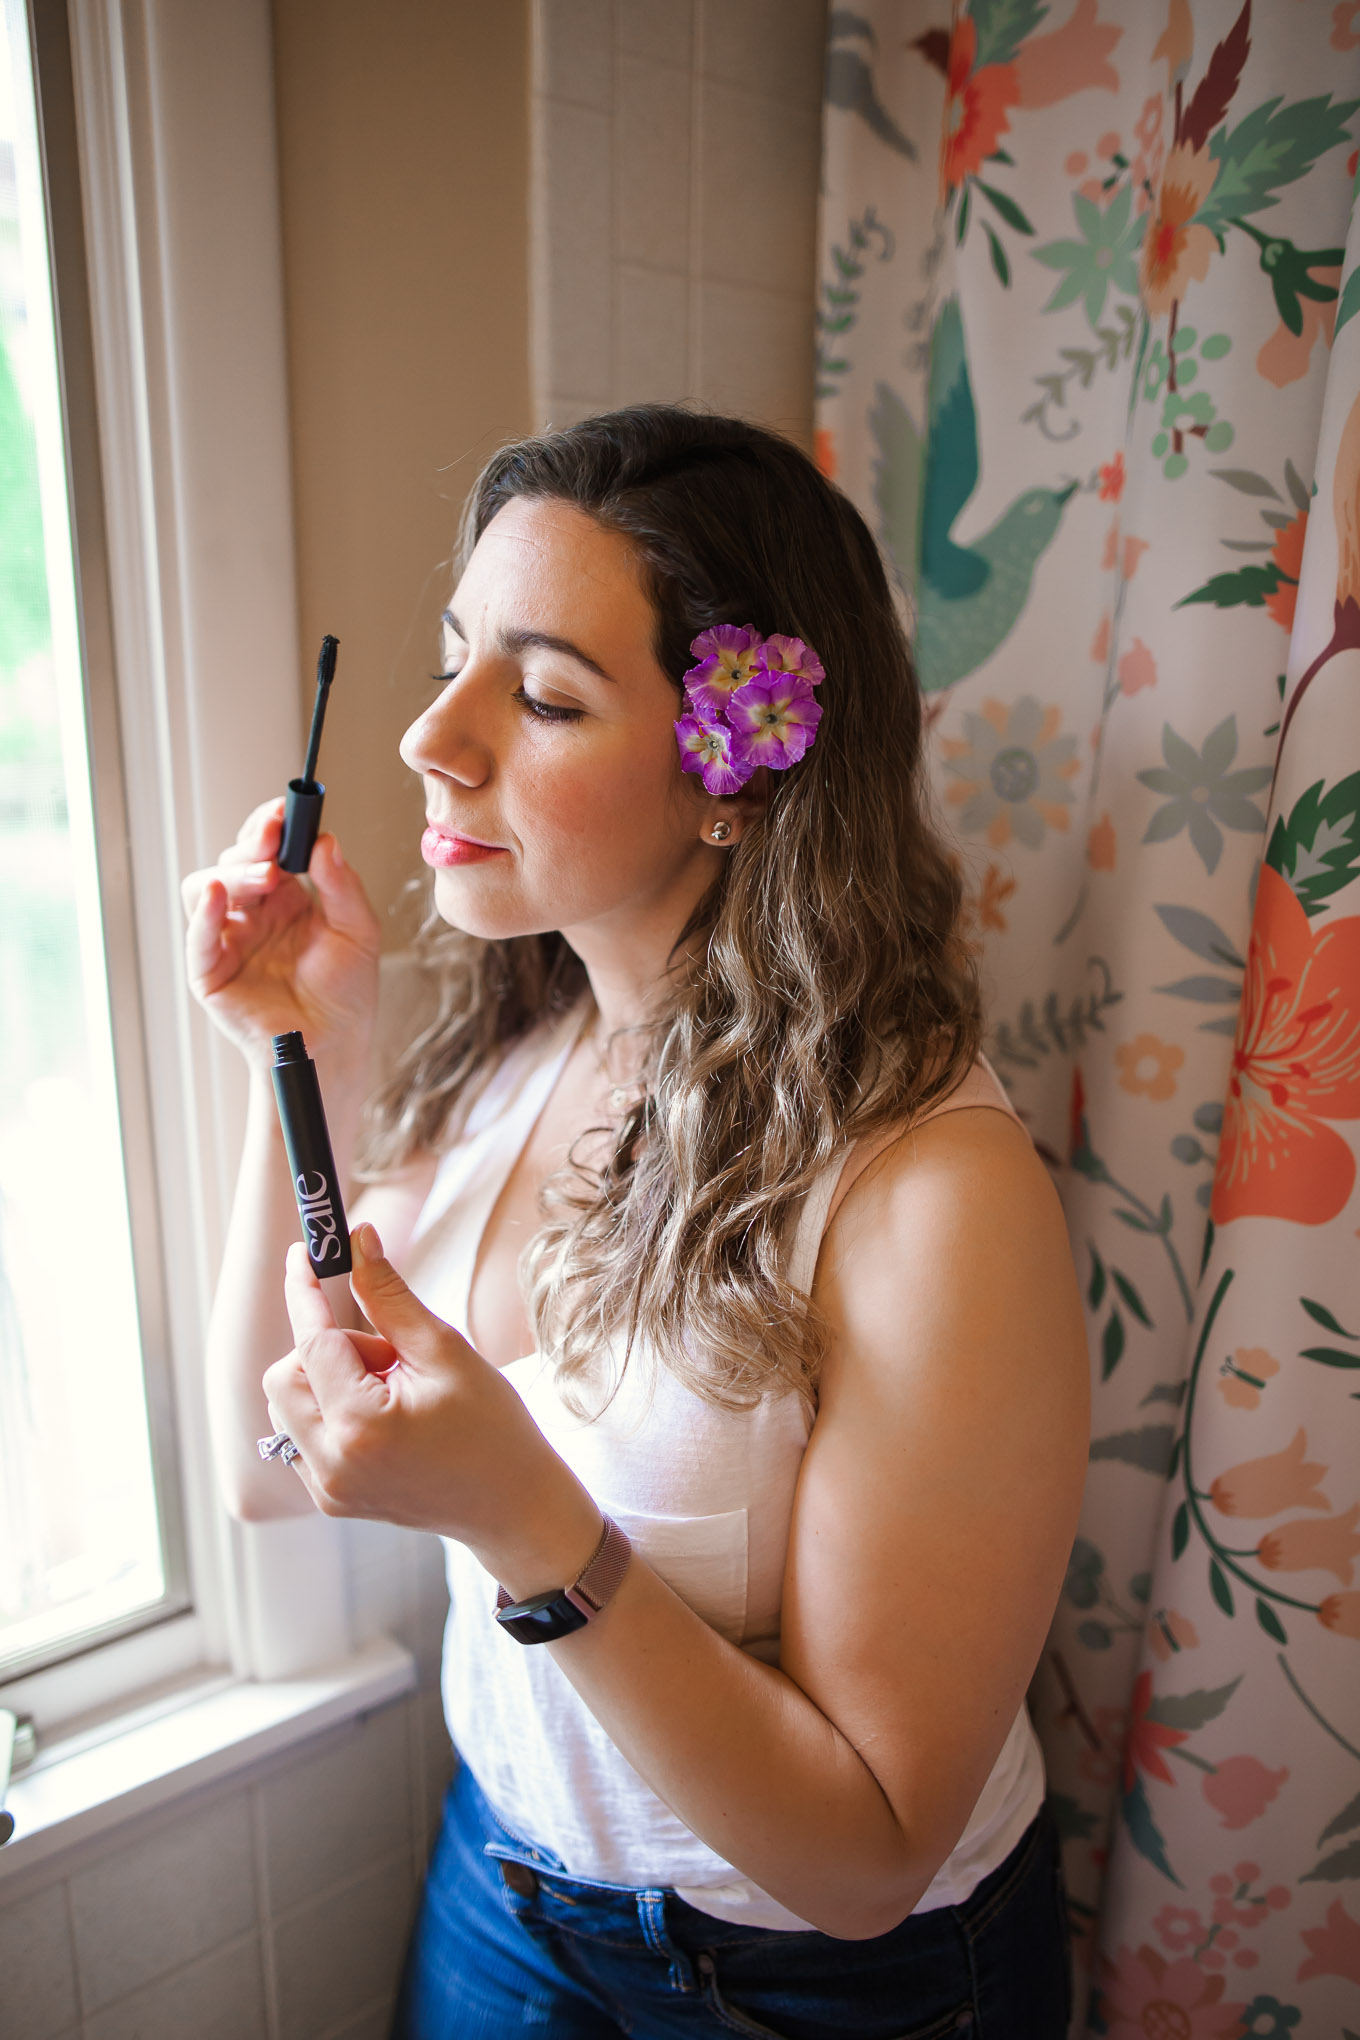 Clean Beauty by popular Chicago beauty blog, Glass of Glam: image of a woman in a white tank top and jeans and standing in front of a floral shower curtain while wearing RMS Beauty Un Cover-Up, Saie Mascara, Ere Perez Lip and Cheek Tint, RMS Beauty Lip2Cheek, Ilia Brow Gel, RMS Beauty Magic Luminizer